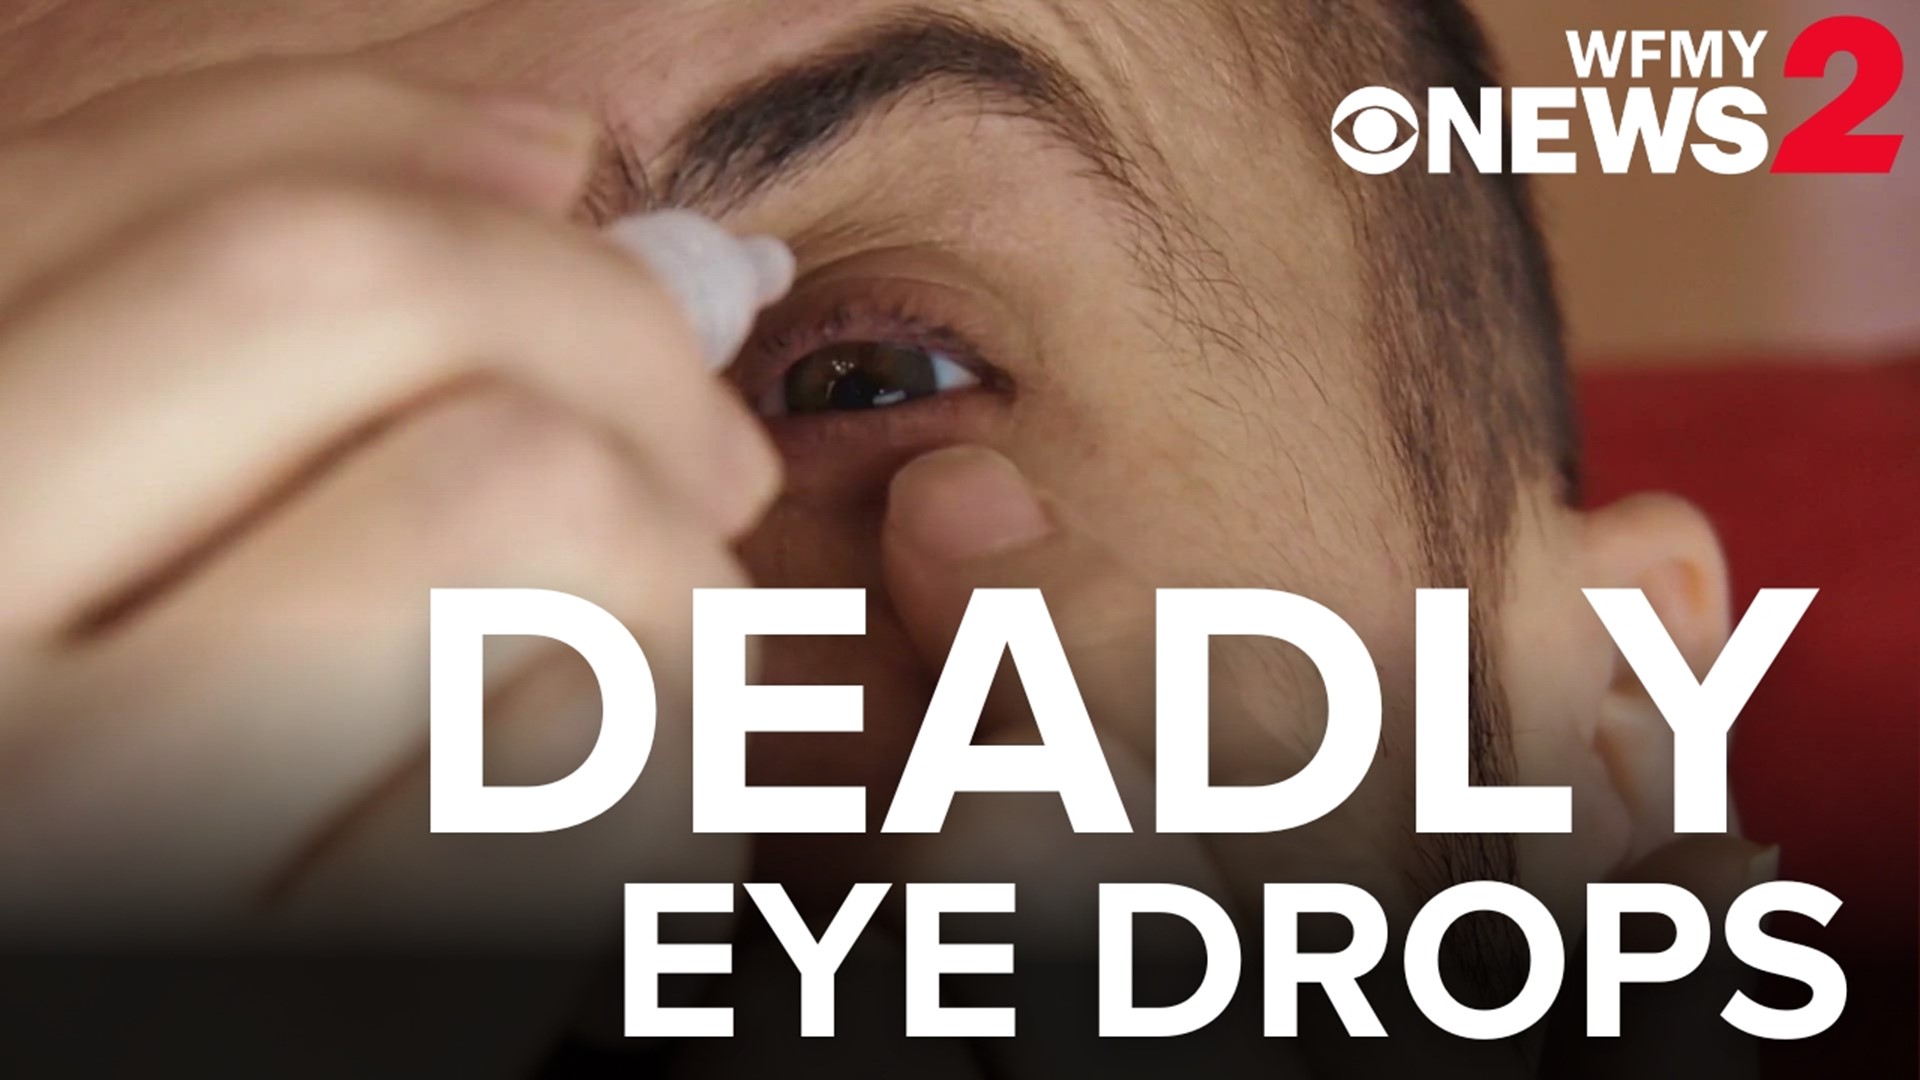 The U.S. FDA is urging people to use caution when using "artificial tears" eye drops after 68 people in 16 states were infected with a deadly bacteria.